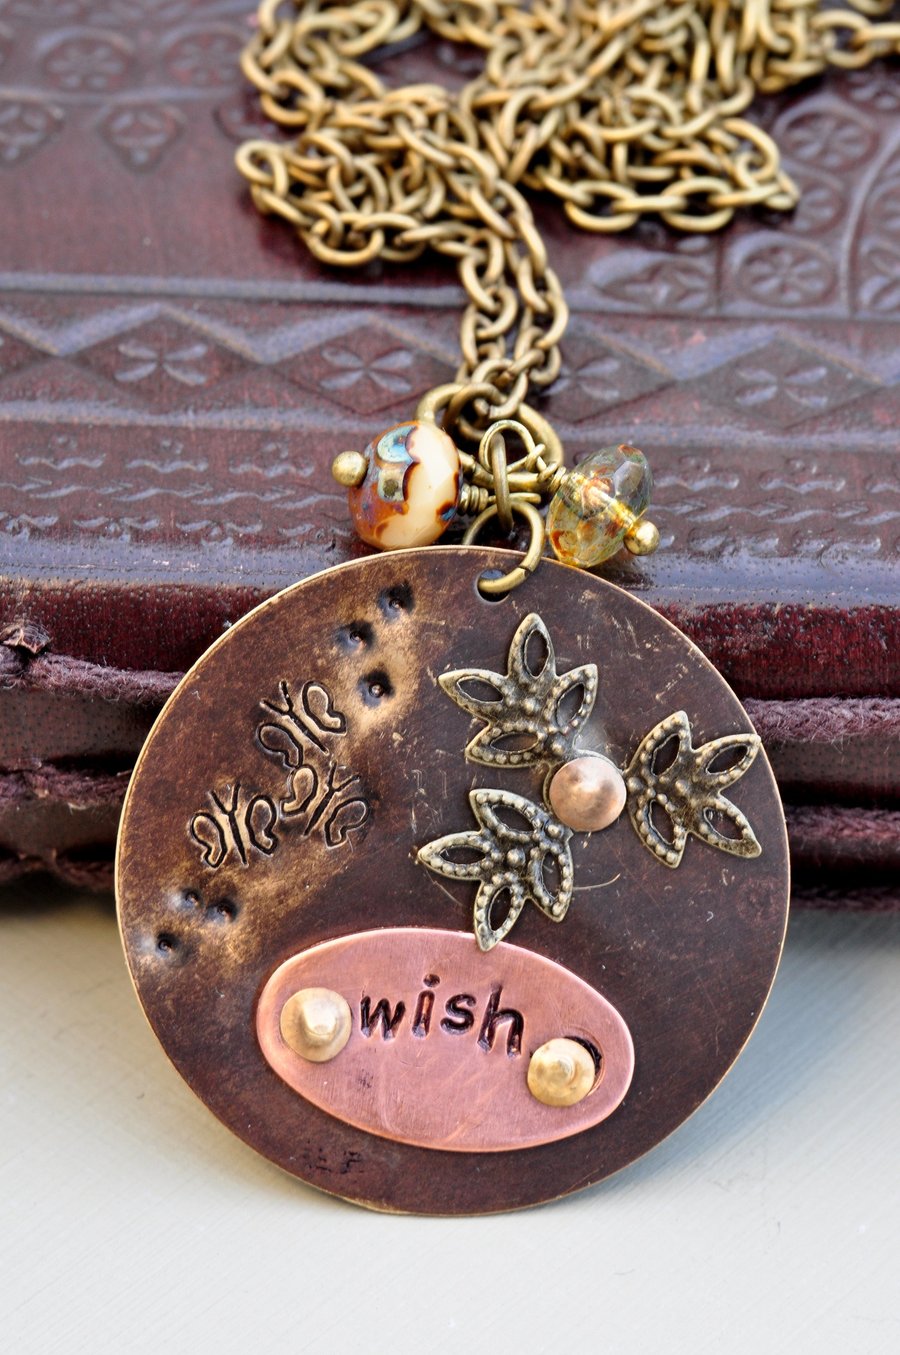 Wishes Vintaj Handstamped Metal Pendant with Czech Beads